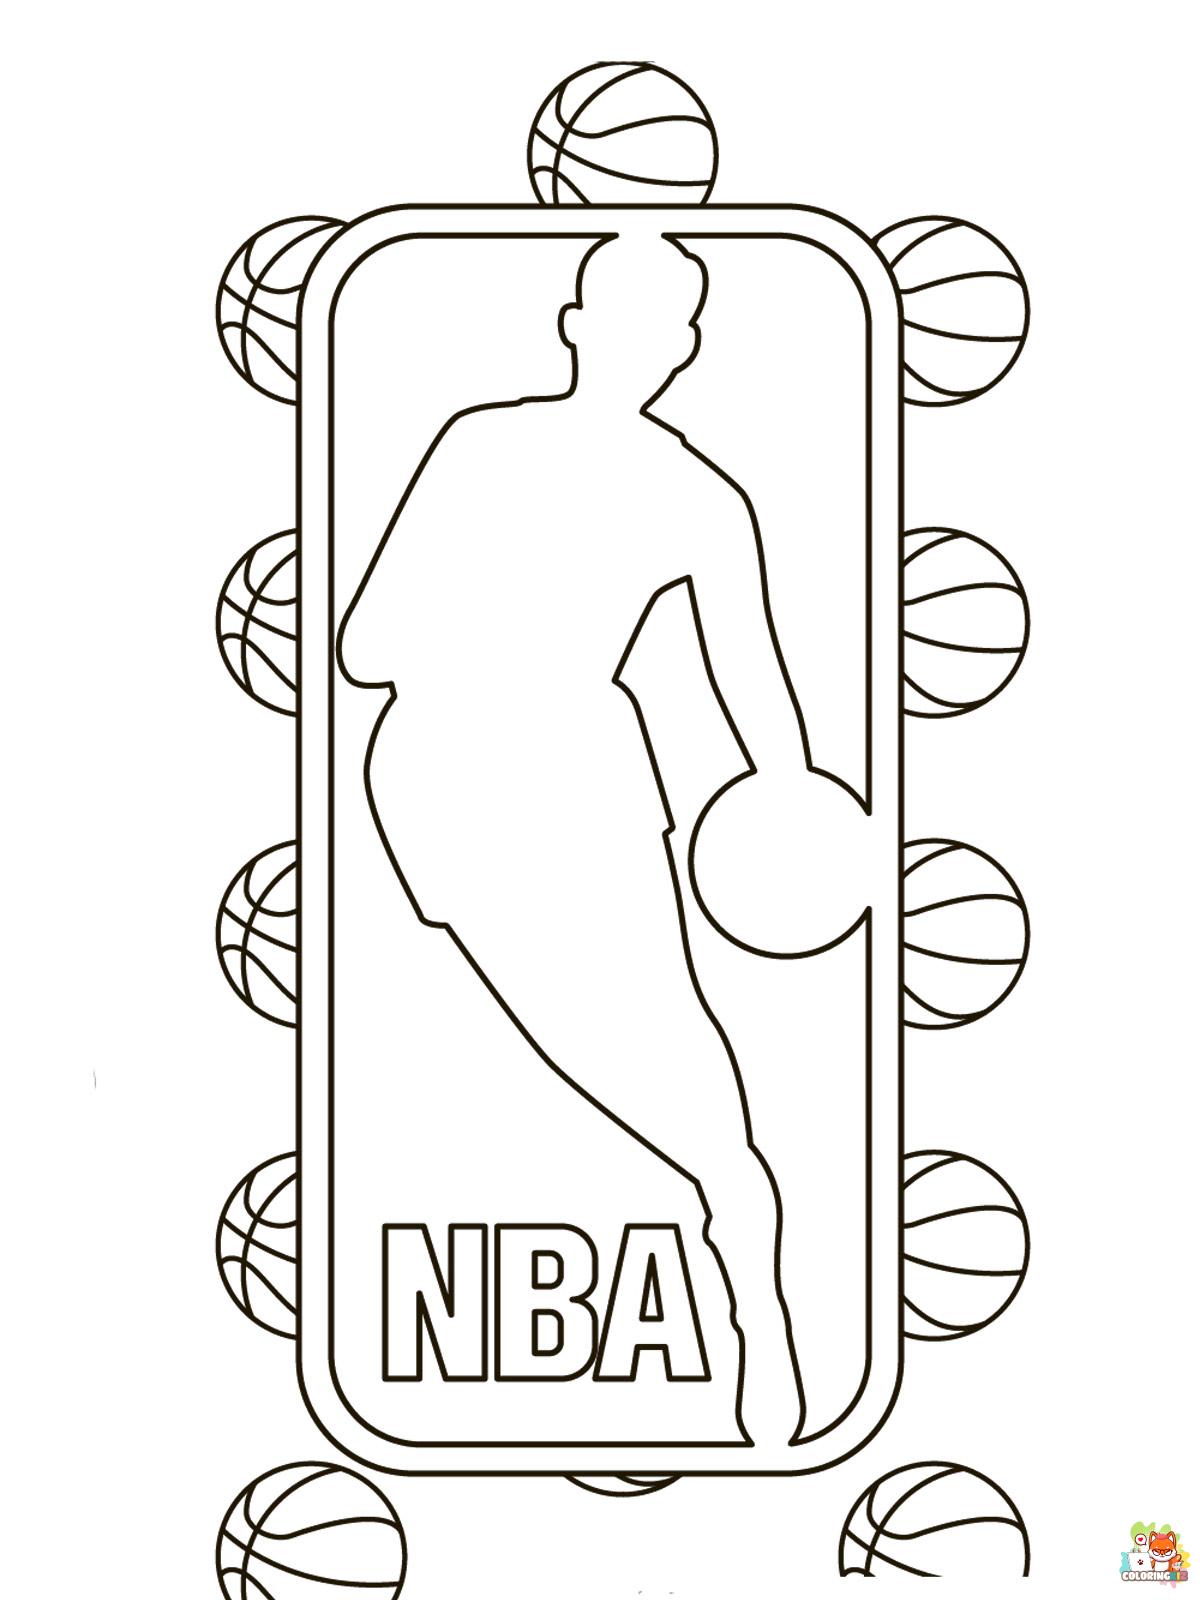 NBA Coloring Pages easy 1